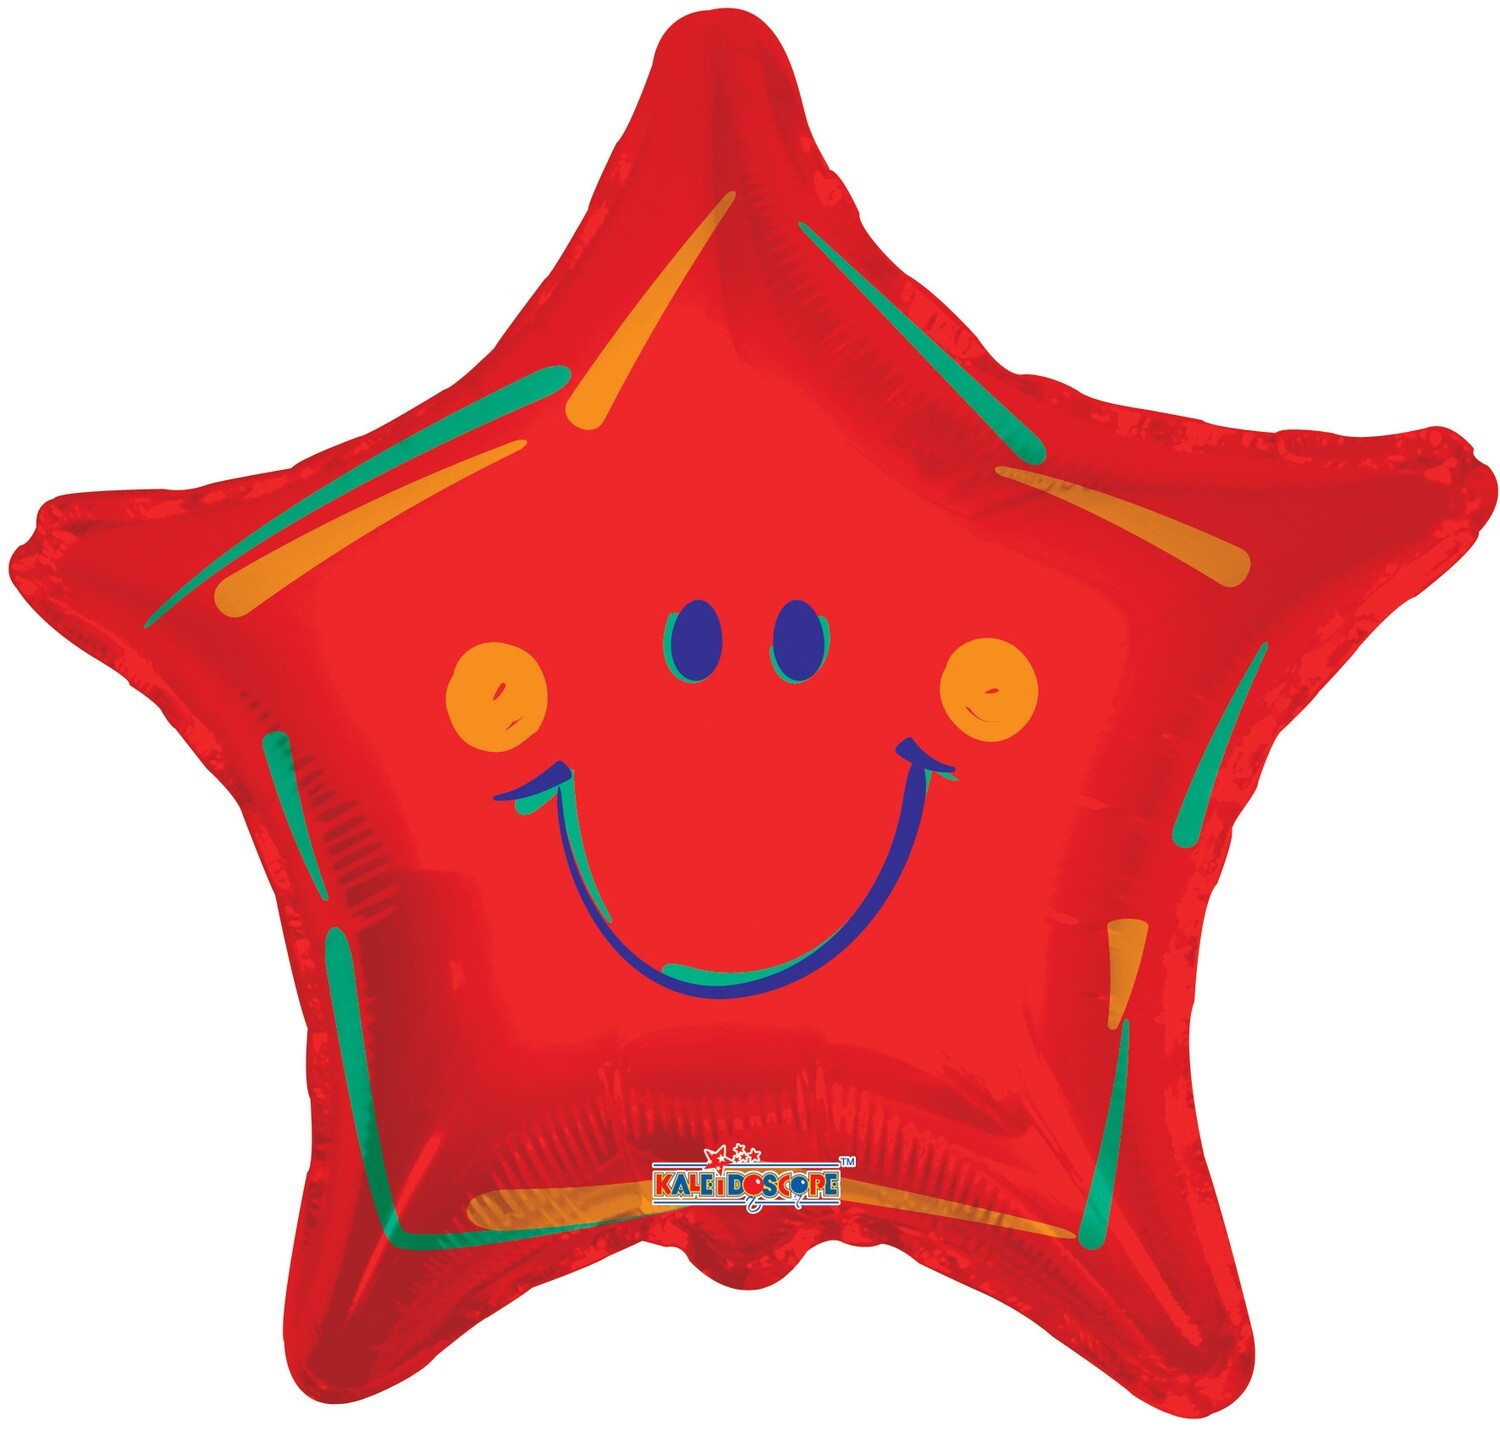 18 - STAR WITH SMILEY FACE RED